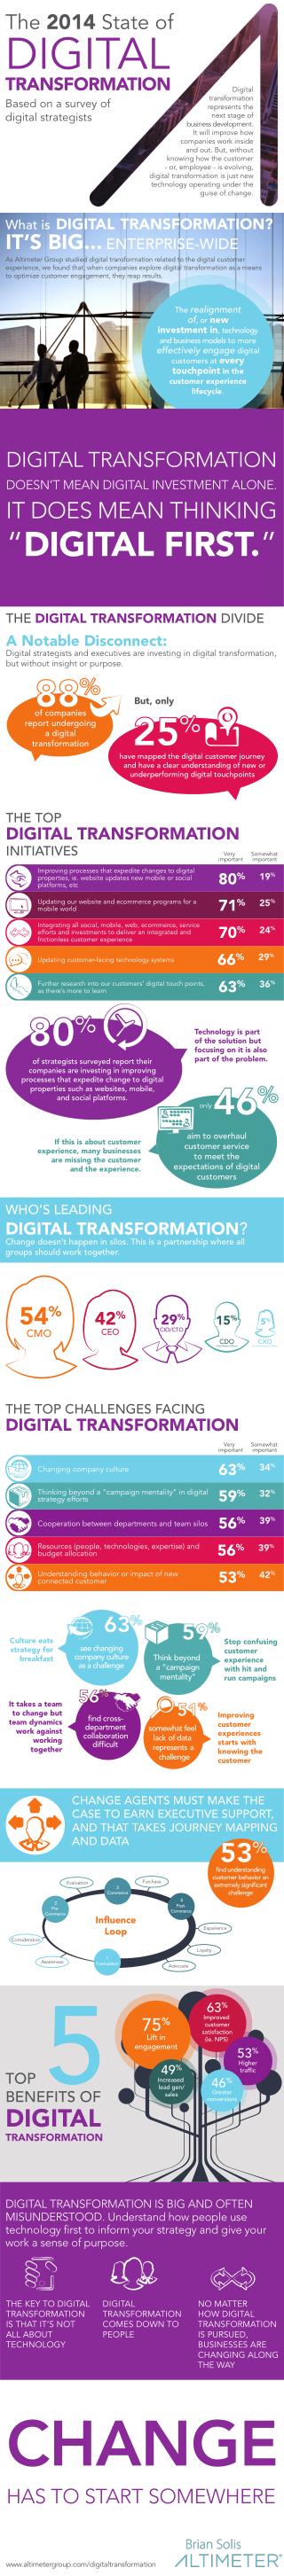 [Infographic] The 2014 State of Digital Transformation by Altimeter Group